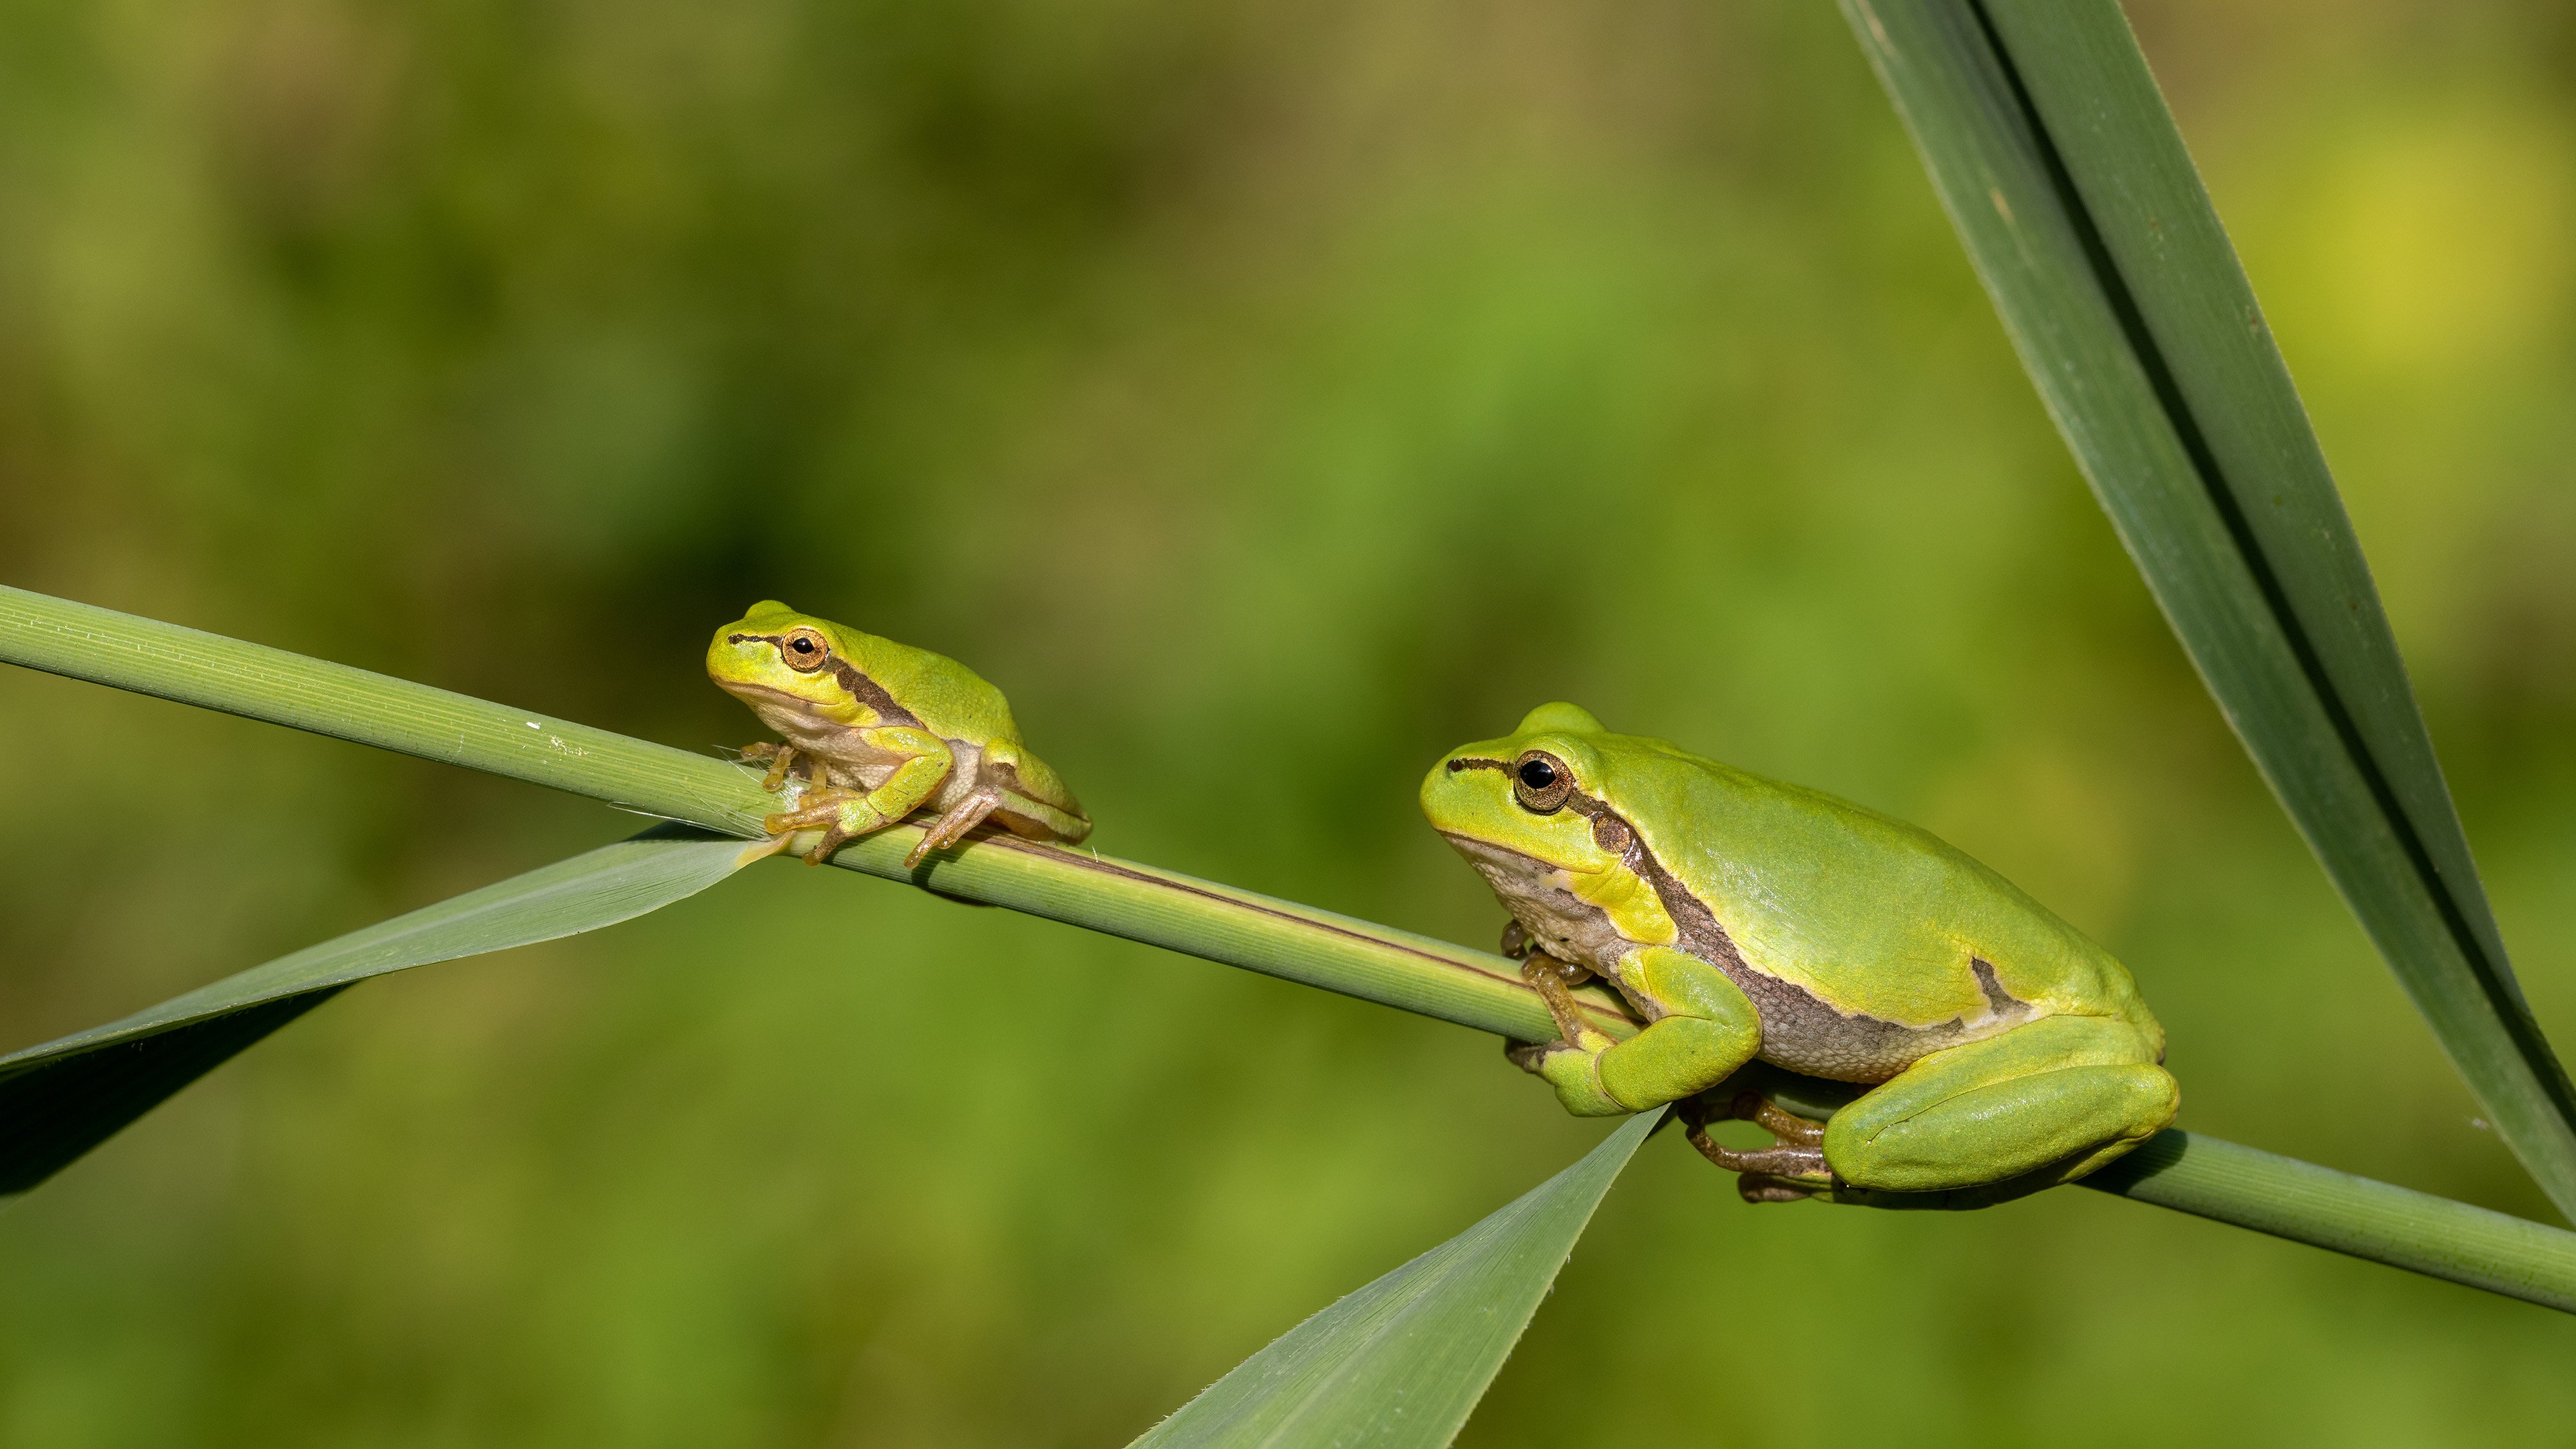 Vertex jumps to TreeFrog to enhance production of Type 1 diabetes cell therapy candidates